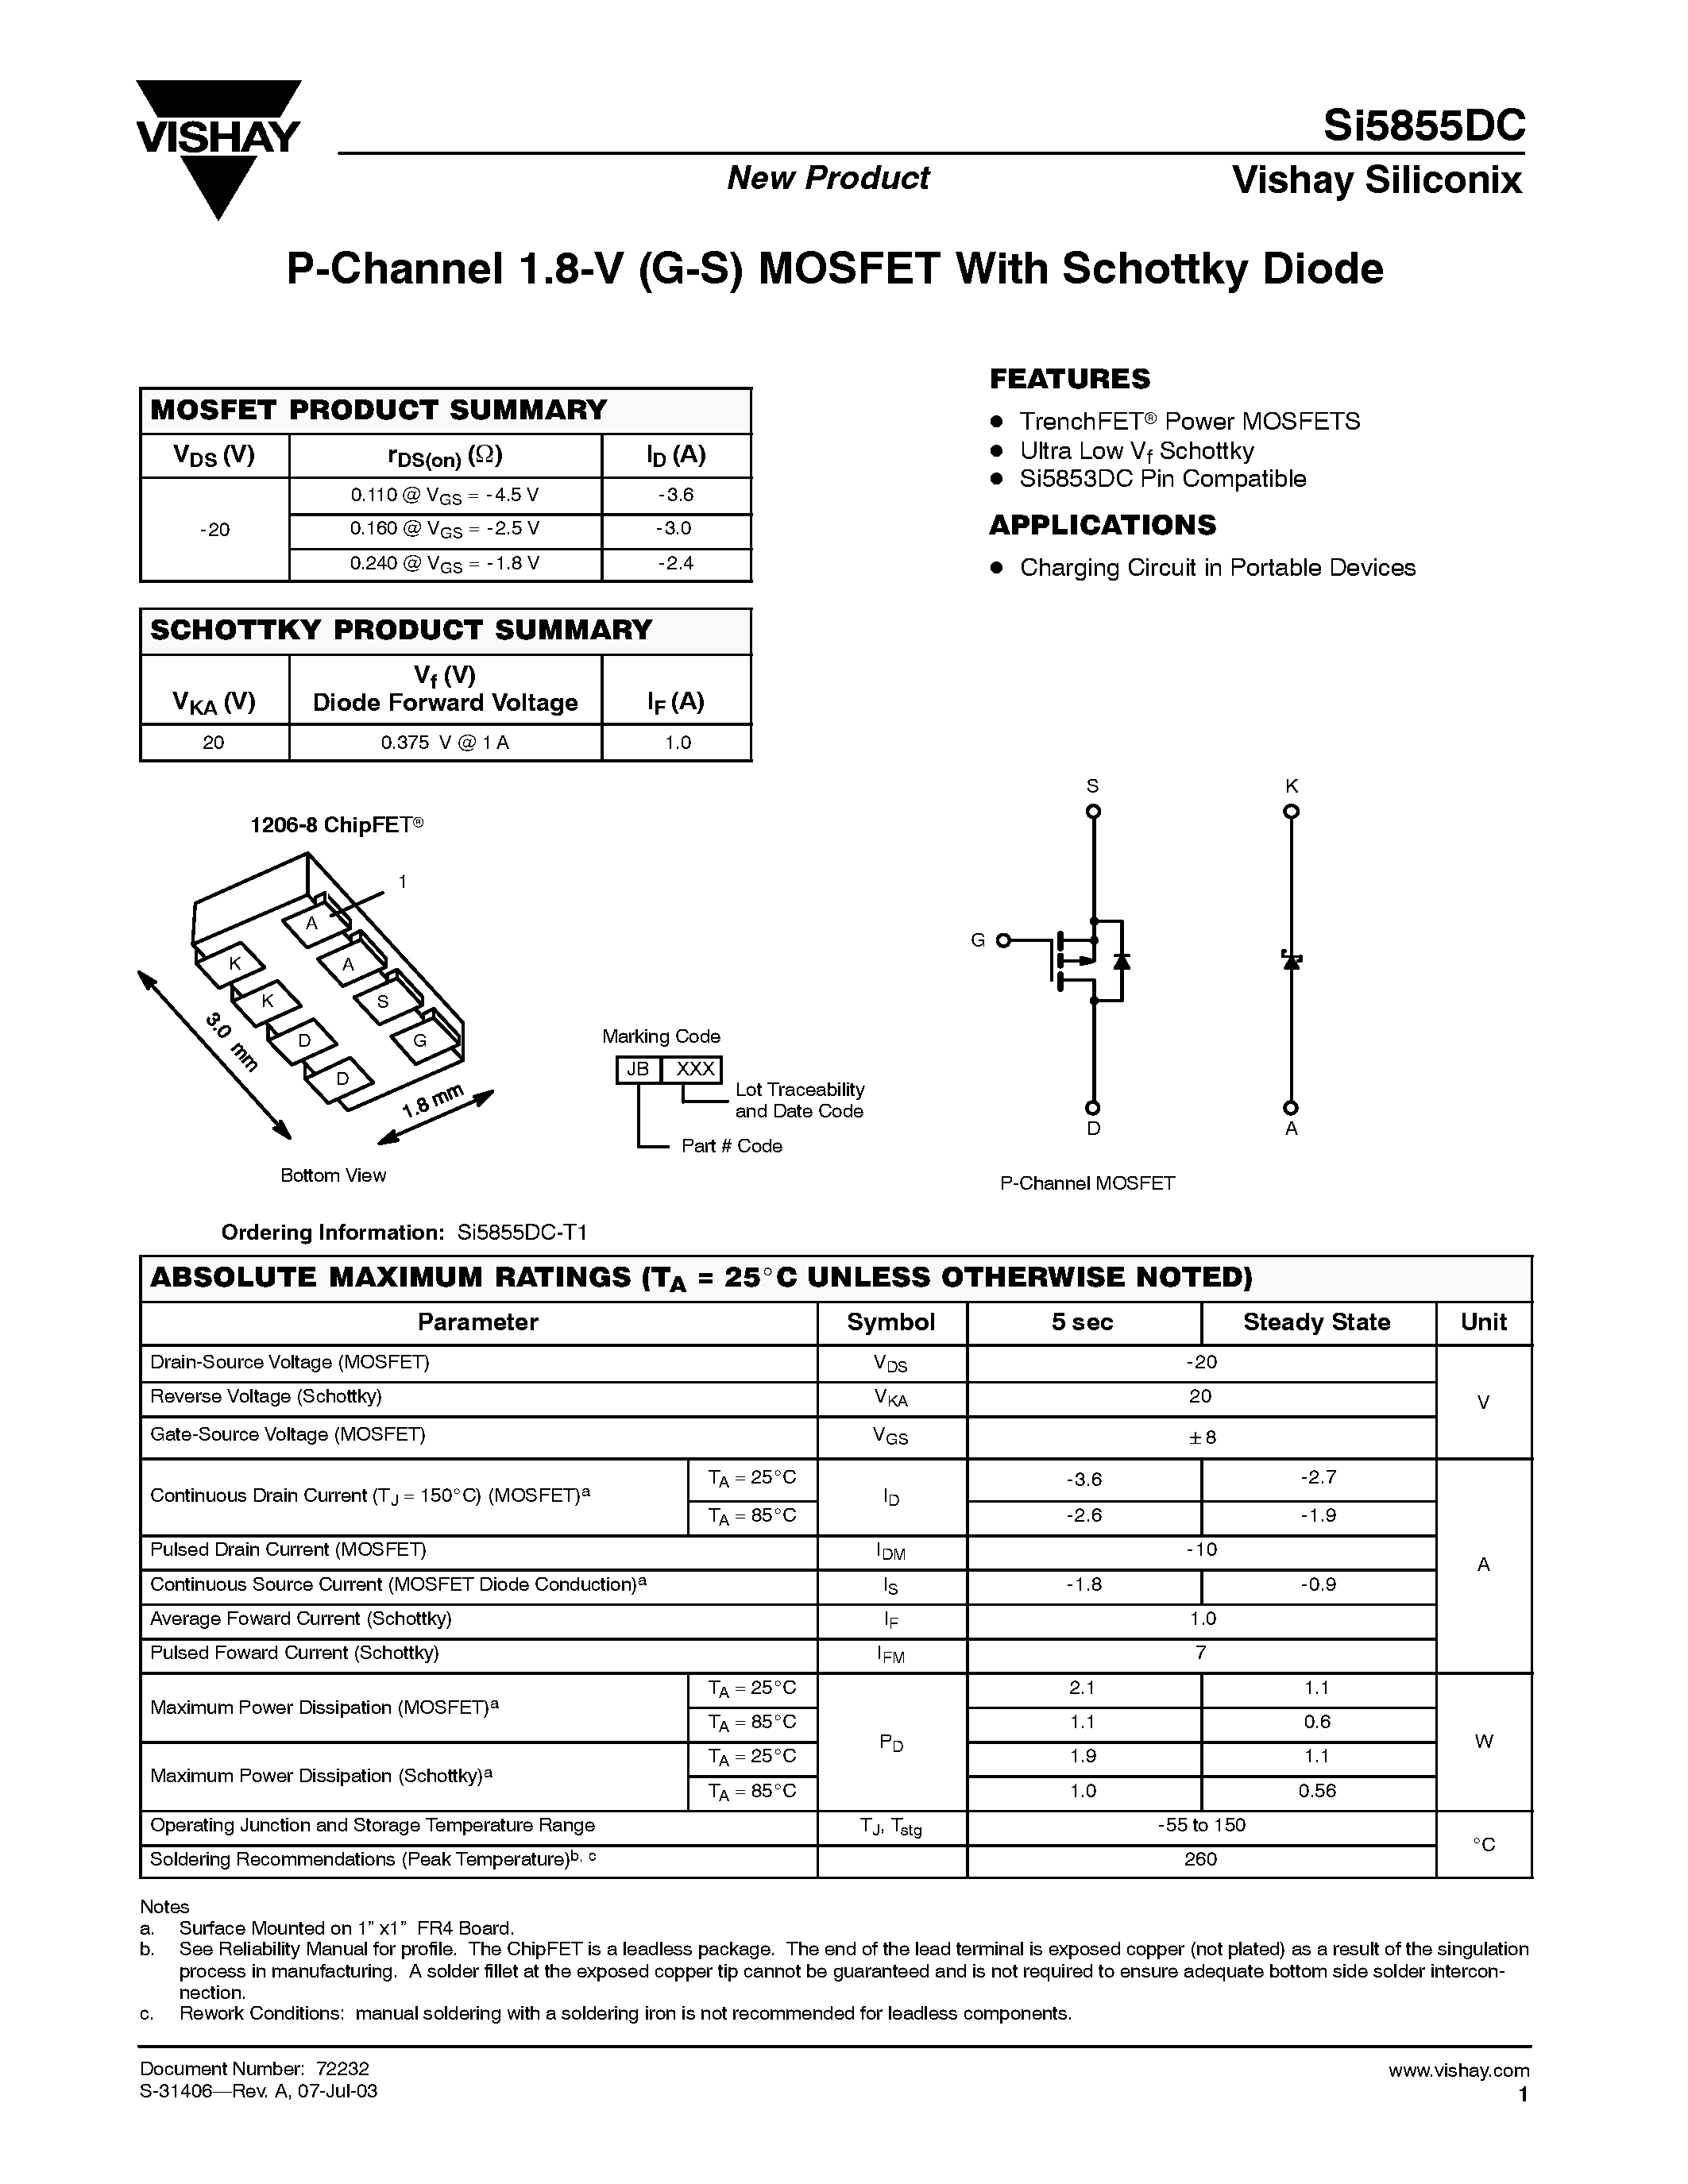 Даташит SI5855DC-T1 - P-Channel 1.8-V (G-S) MOSFET With Schottky Diode страница 1